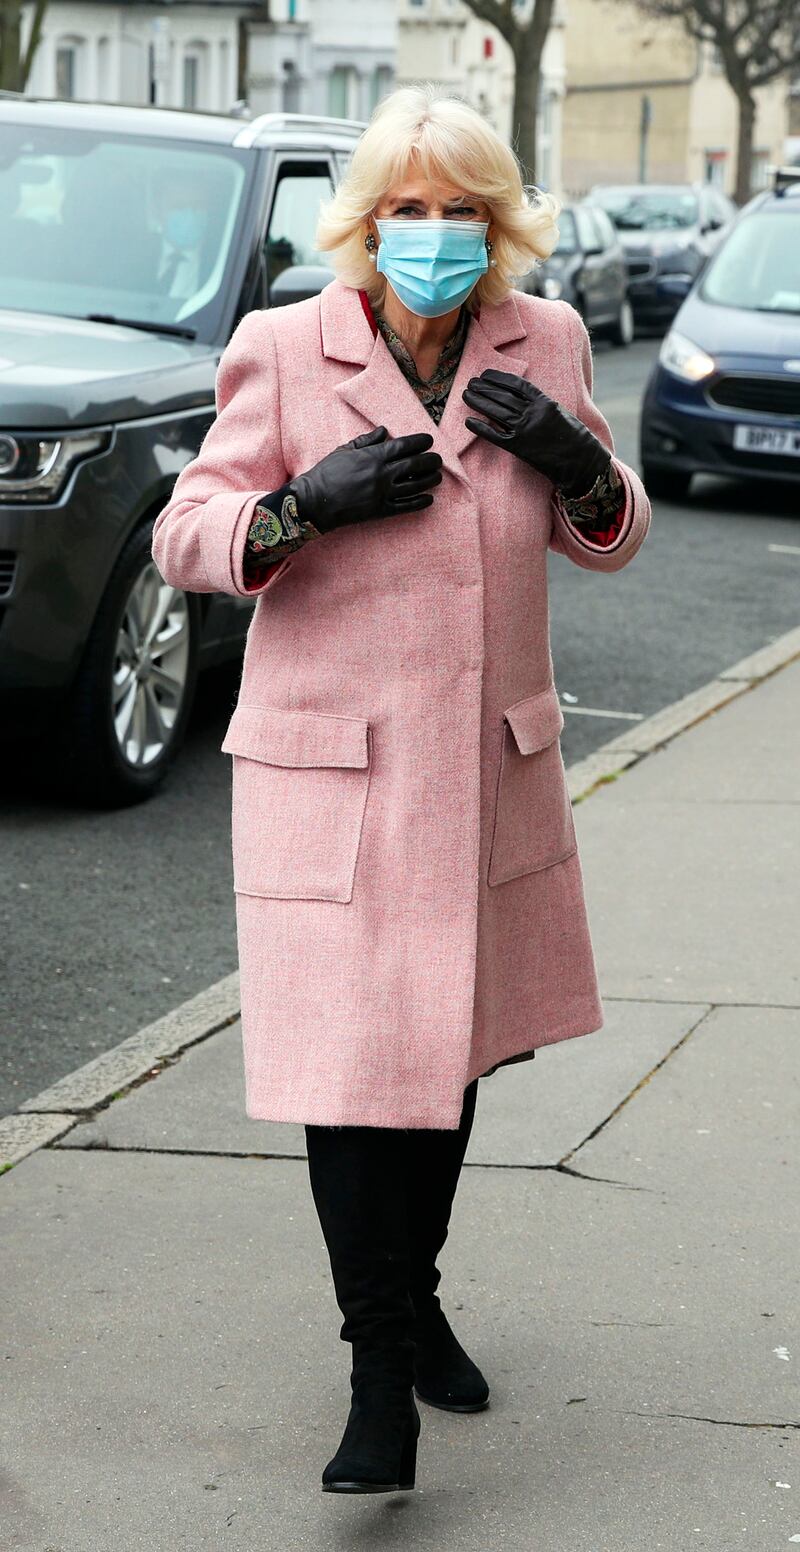 The queen consort, in a pink tweed coat and black boots, visits the Community Vaccination Centre at St Paul's Church on March 3, 2021 in Croydon, England. Getty Images